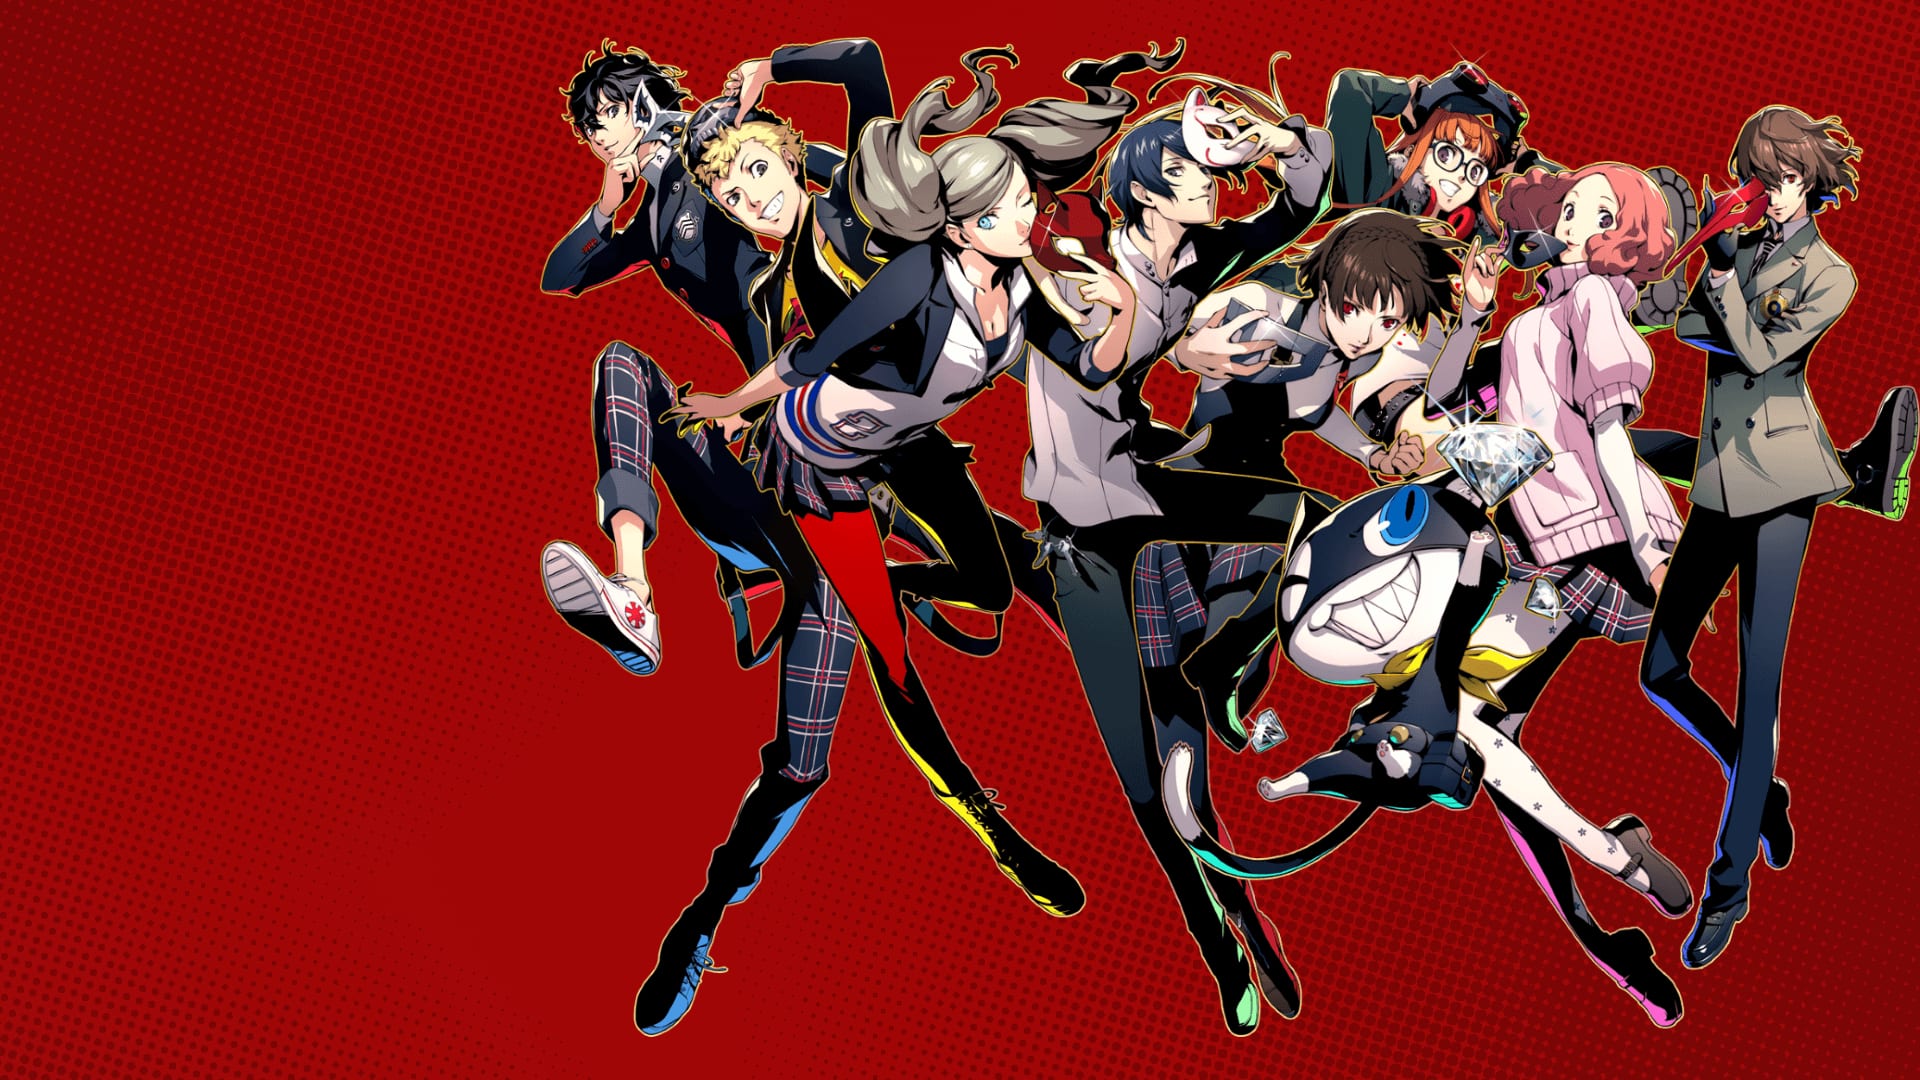 4K & HD Persona 5 Wallpapers You Need to Make Your Desktop Background.